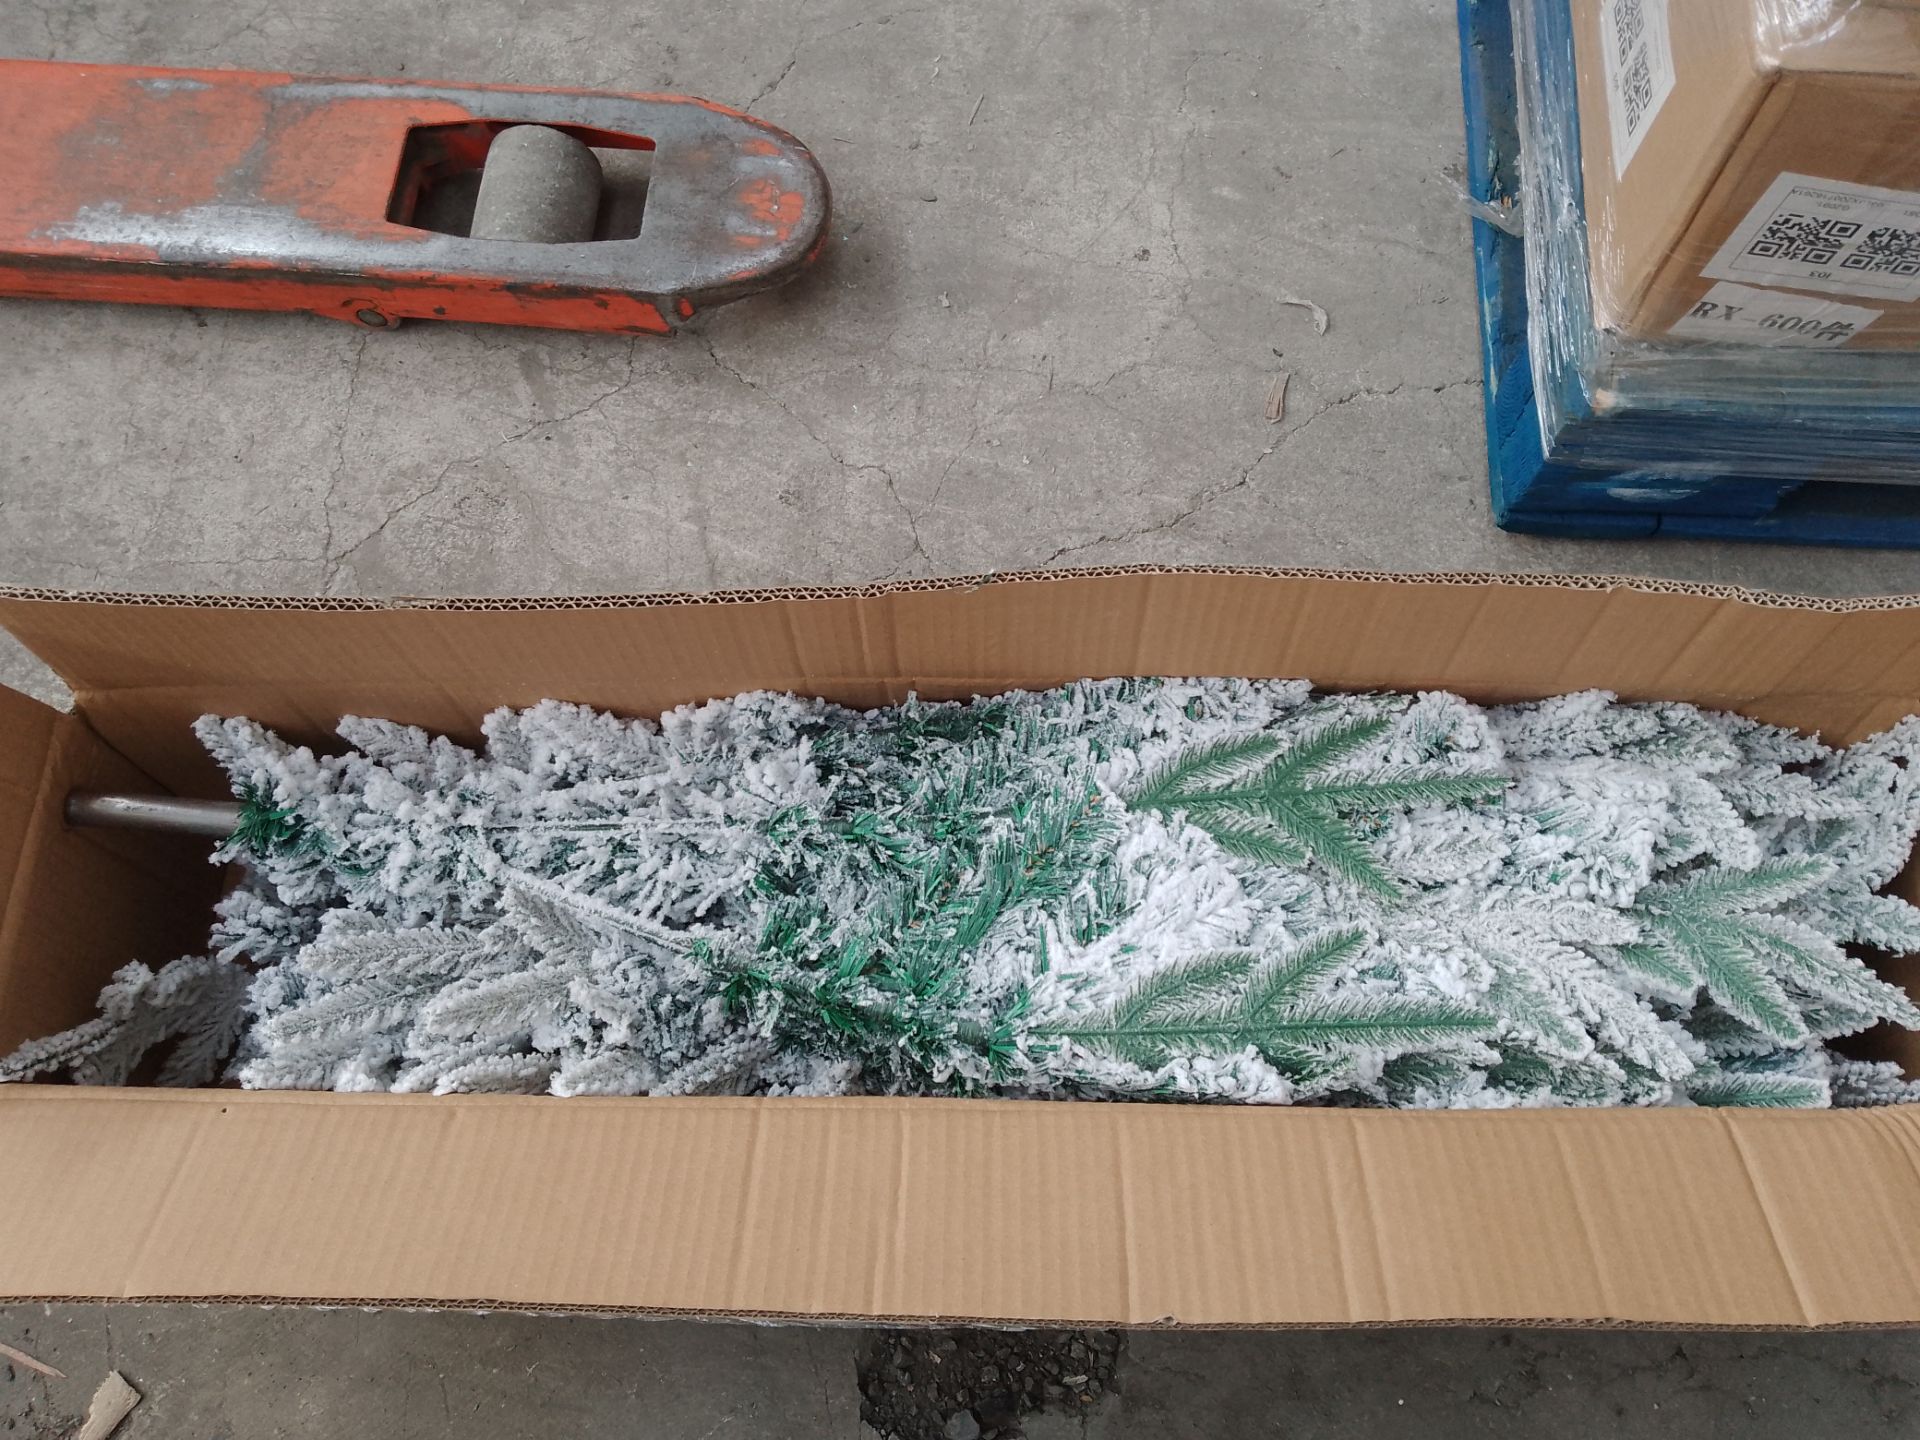 (P80) - 1 PALLET CONTAINING 25 BRAND NEW MICOZY FROSTED CHRISTMAS TREES - Image 2 of 4